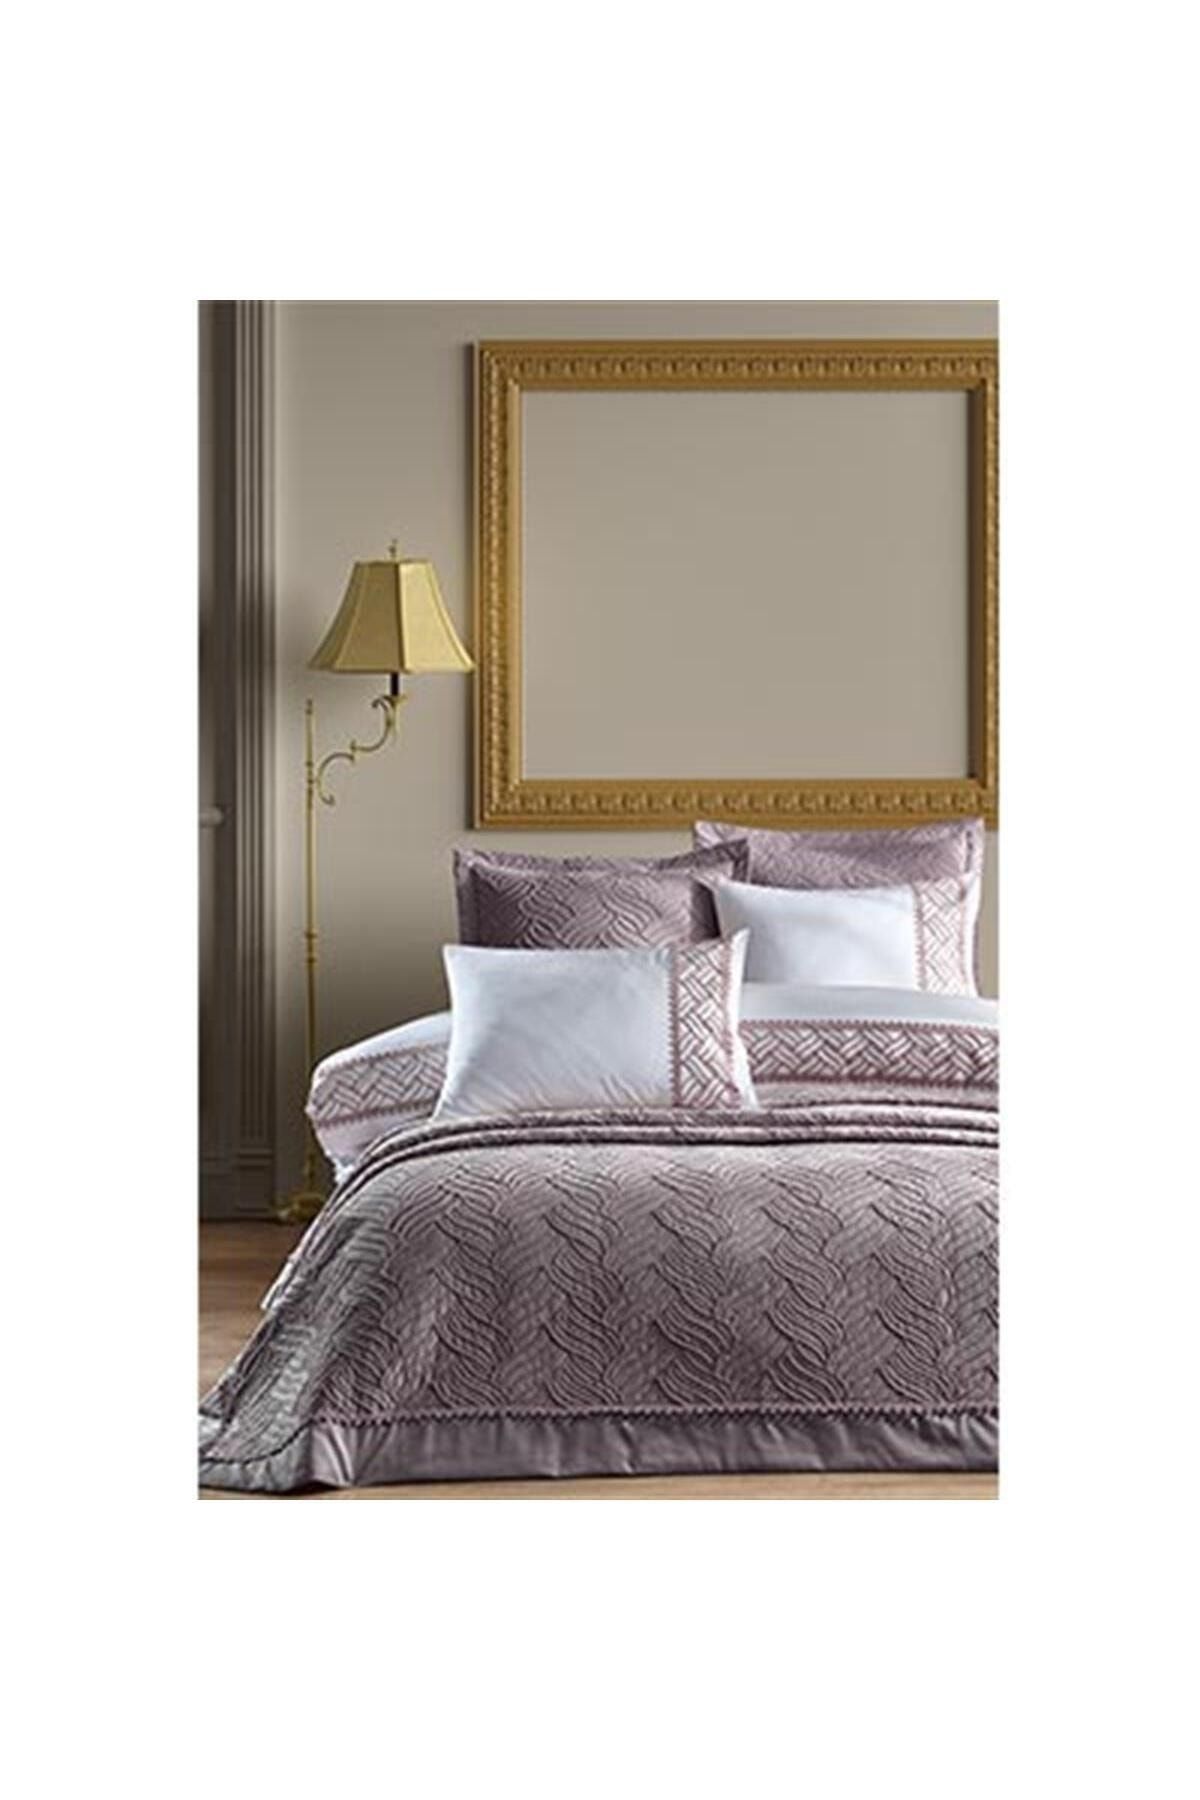 Hotel Collection Fresco Duvet Cover Set, Full/Queen, Created for